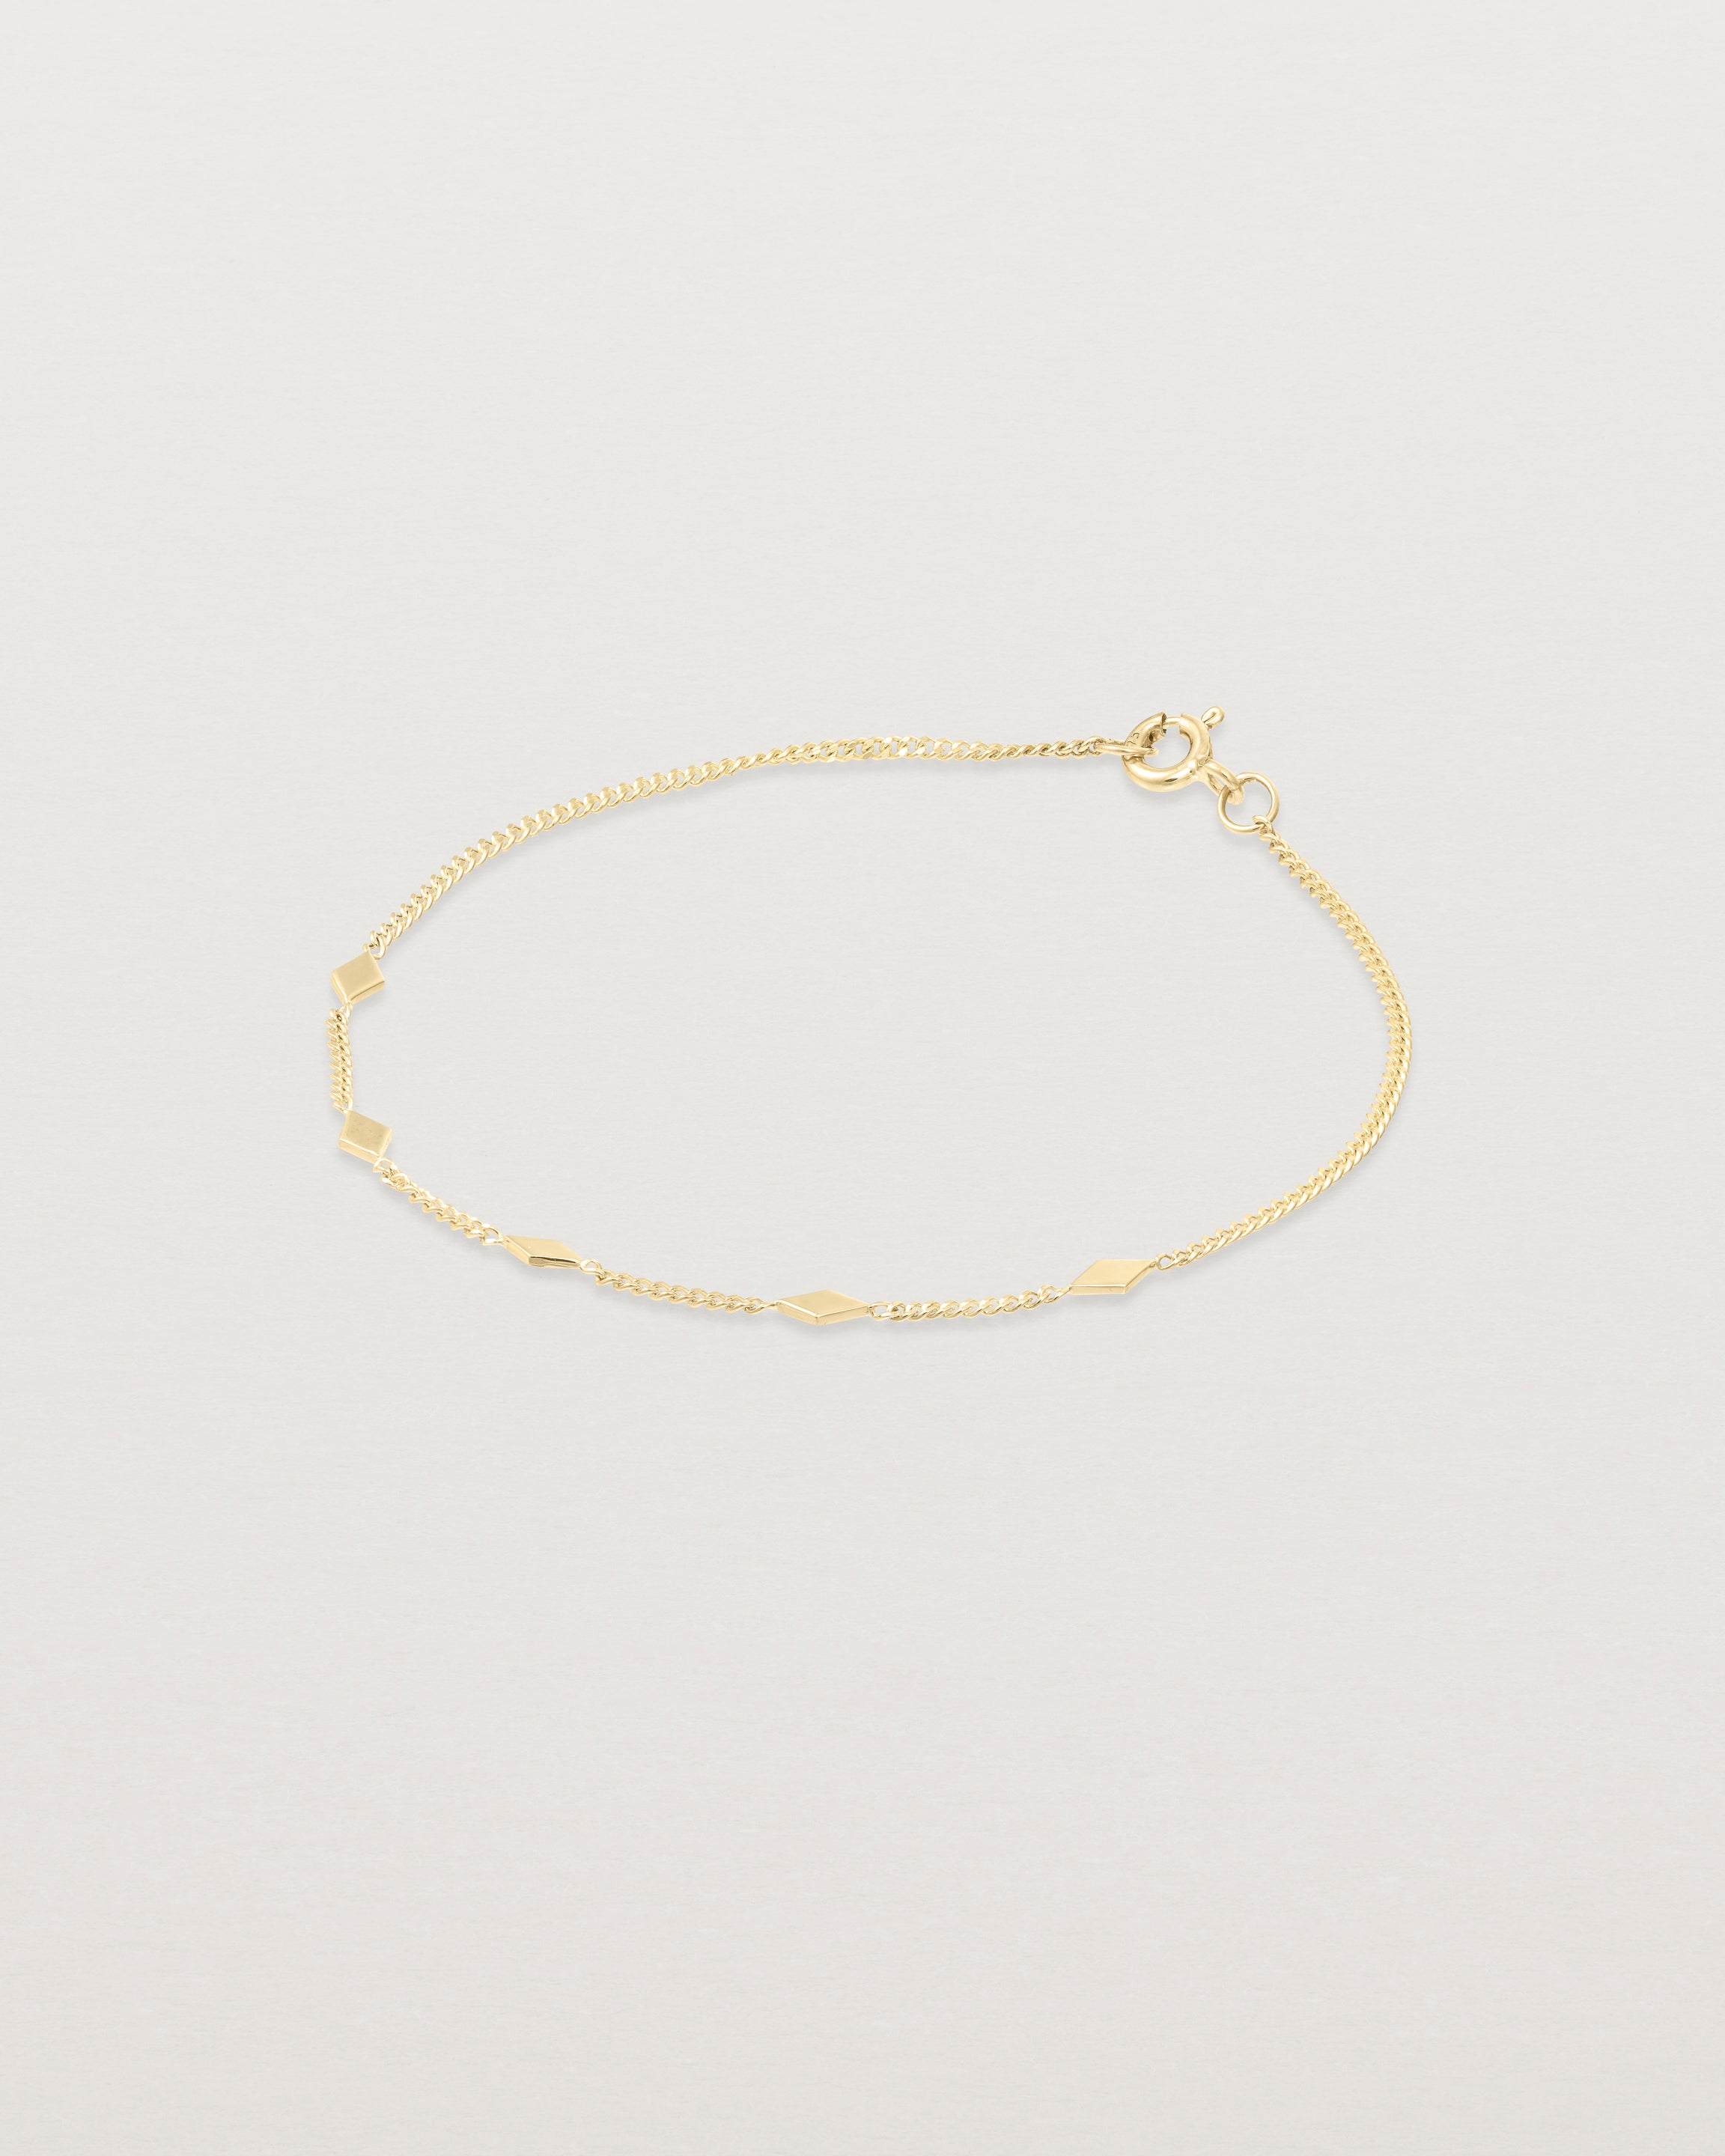 Angled view of the Nuna Charm Bracelet in Yellow Gold.